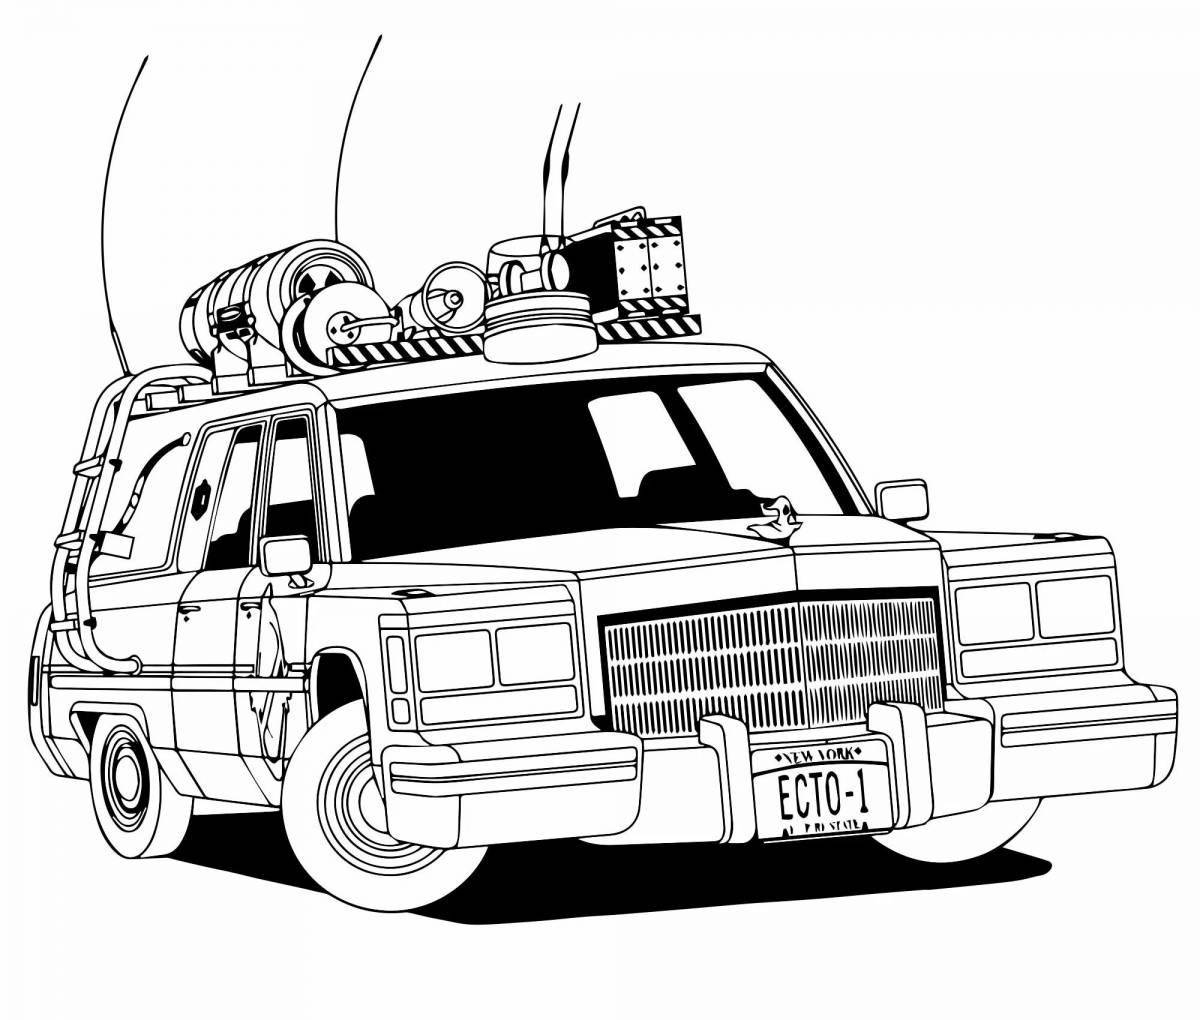 Ghostbuster's enchanting car coloring page